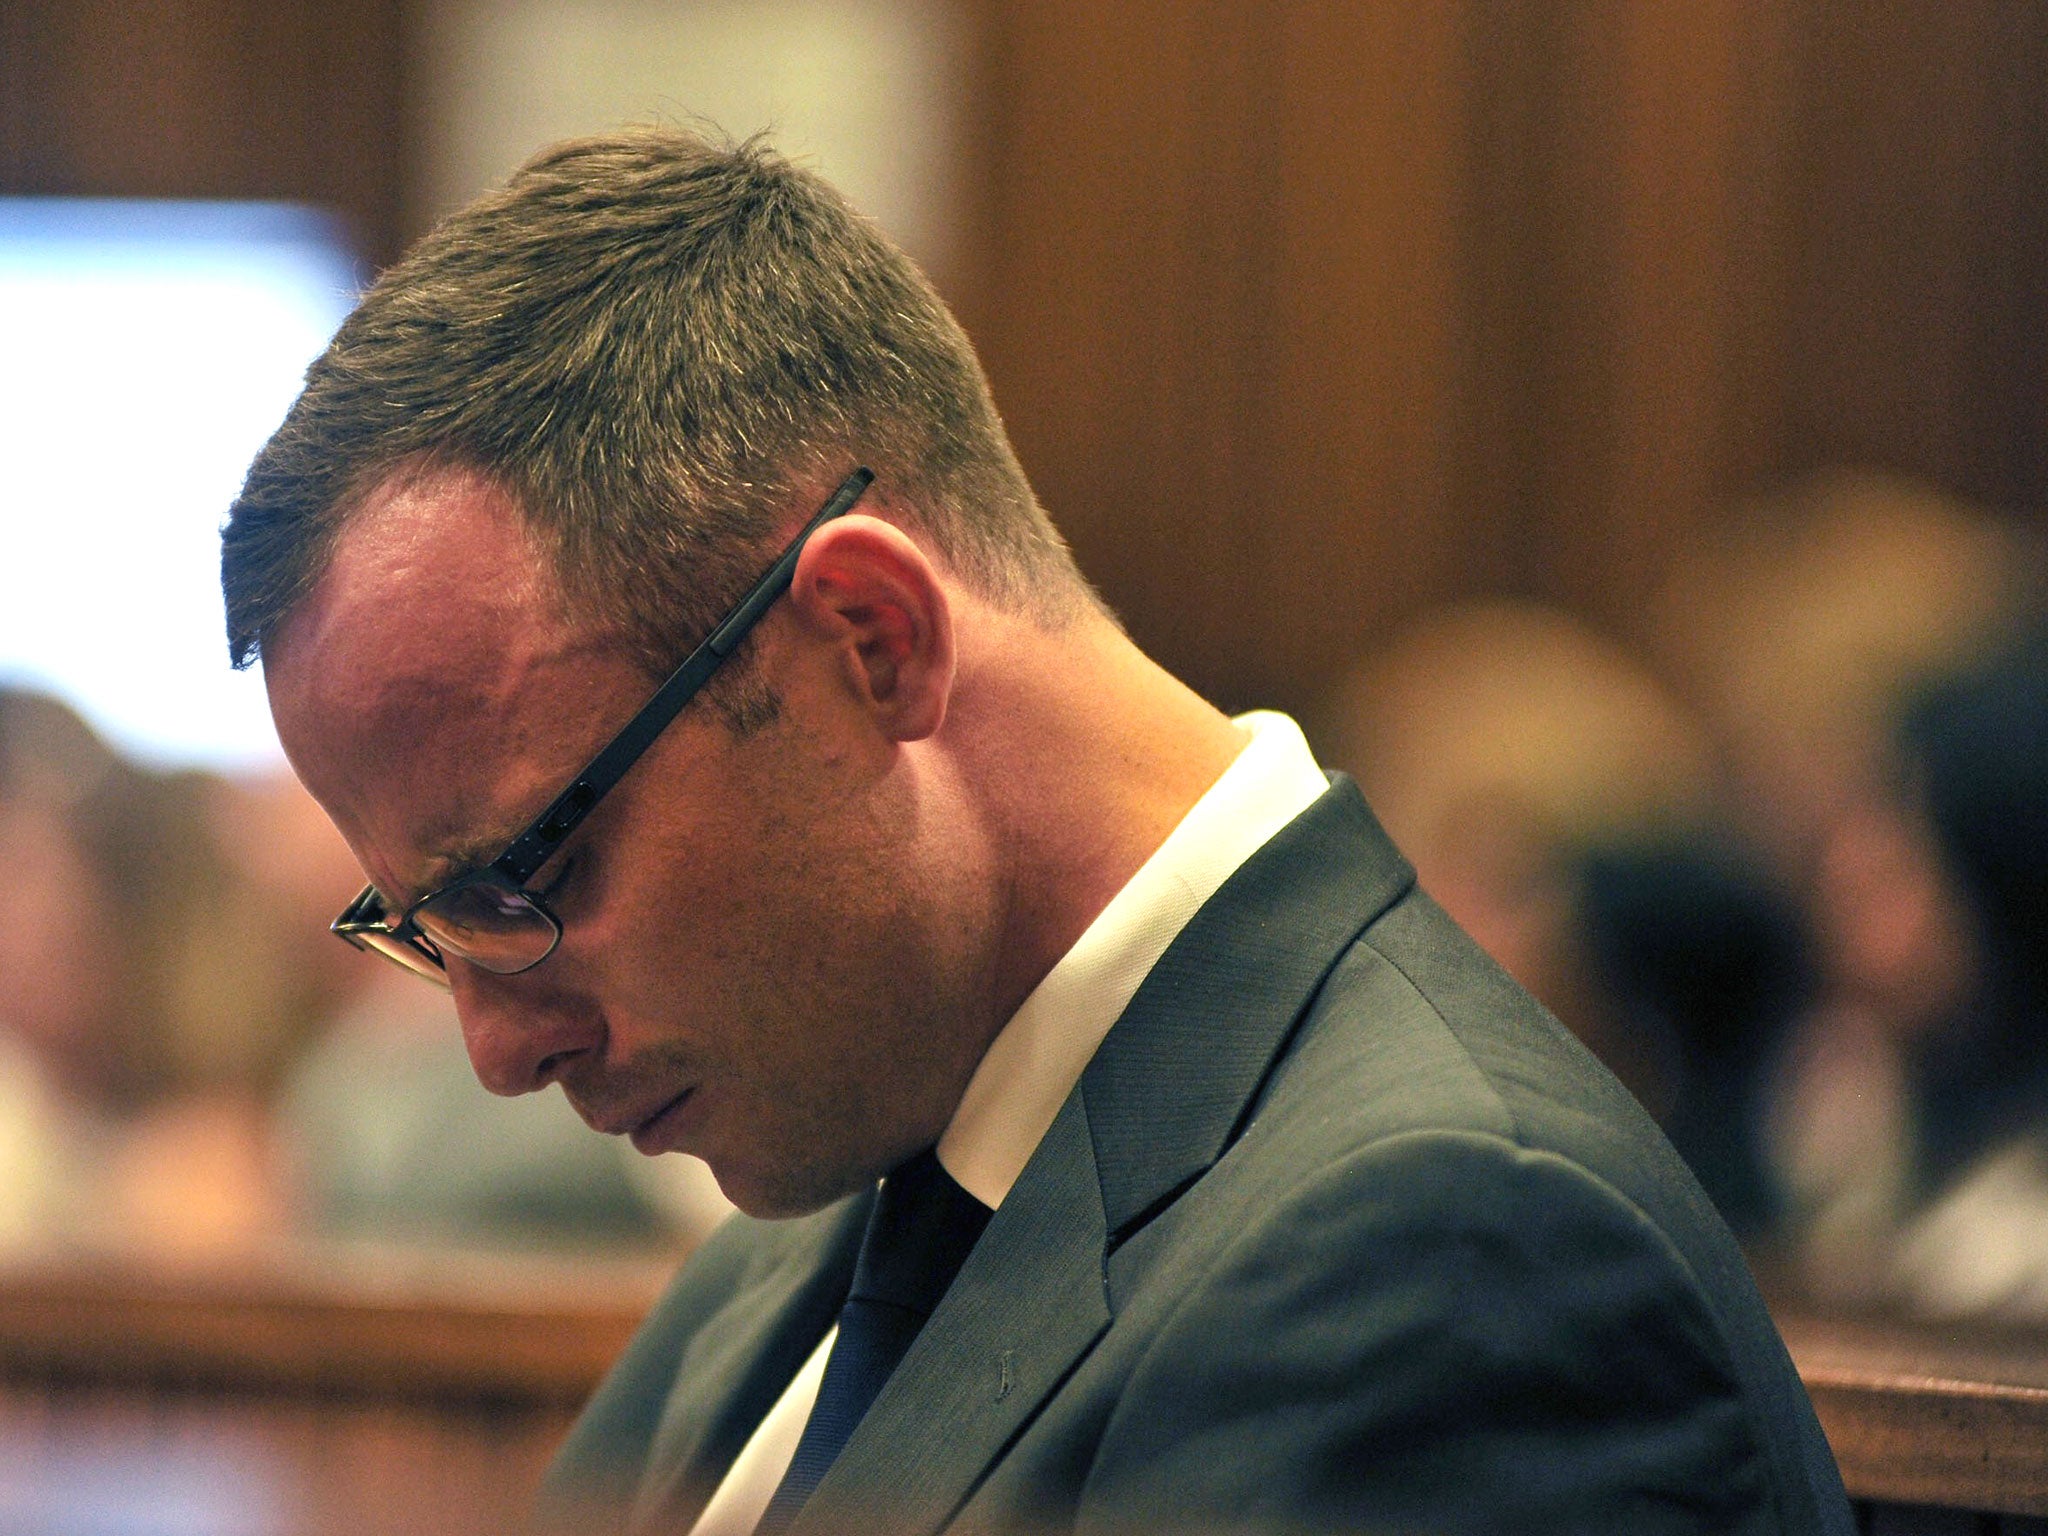 Oscar Pistorius shedding tears as he sits in the dock during his ongoing murder trial in Pretoria